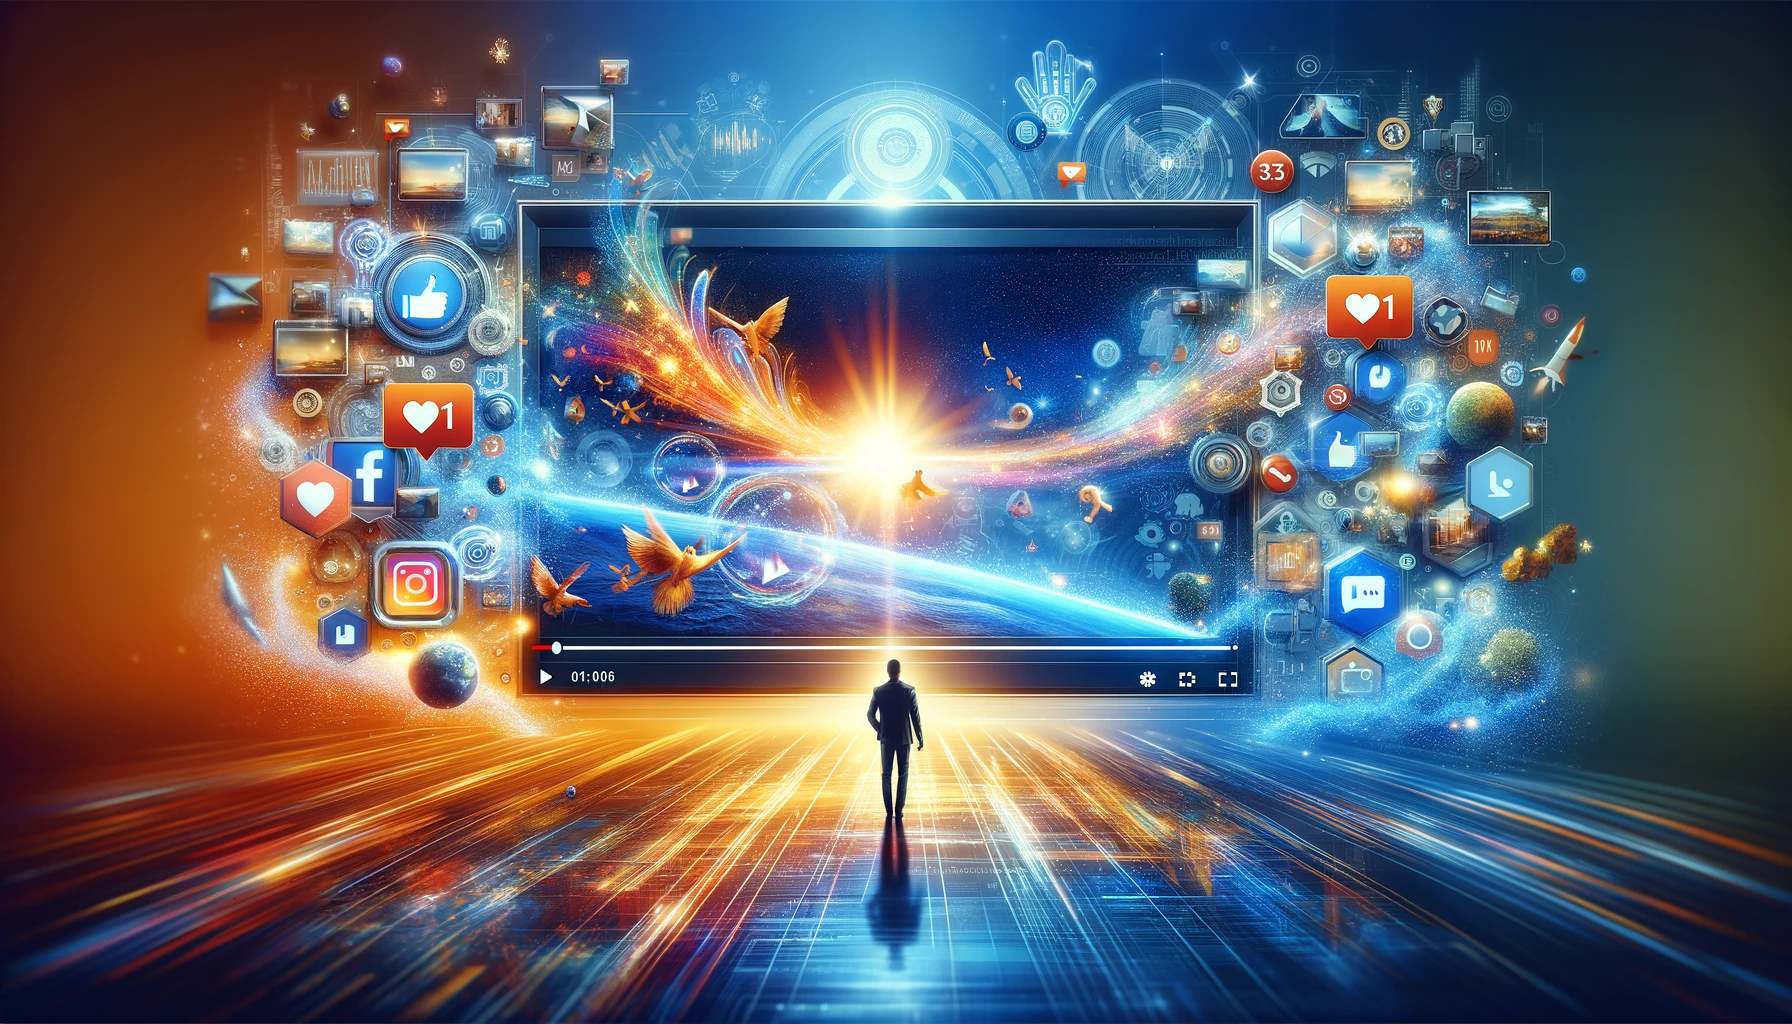 An innovative depiction of video marketing success, illustrating a marketer showcasing effective video content in a bustling digital landscape, underscored by engagement and connectivity symbols.